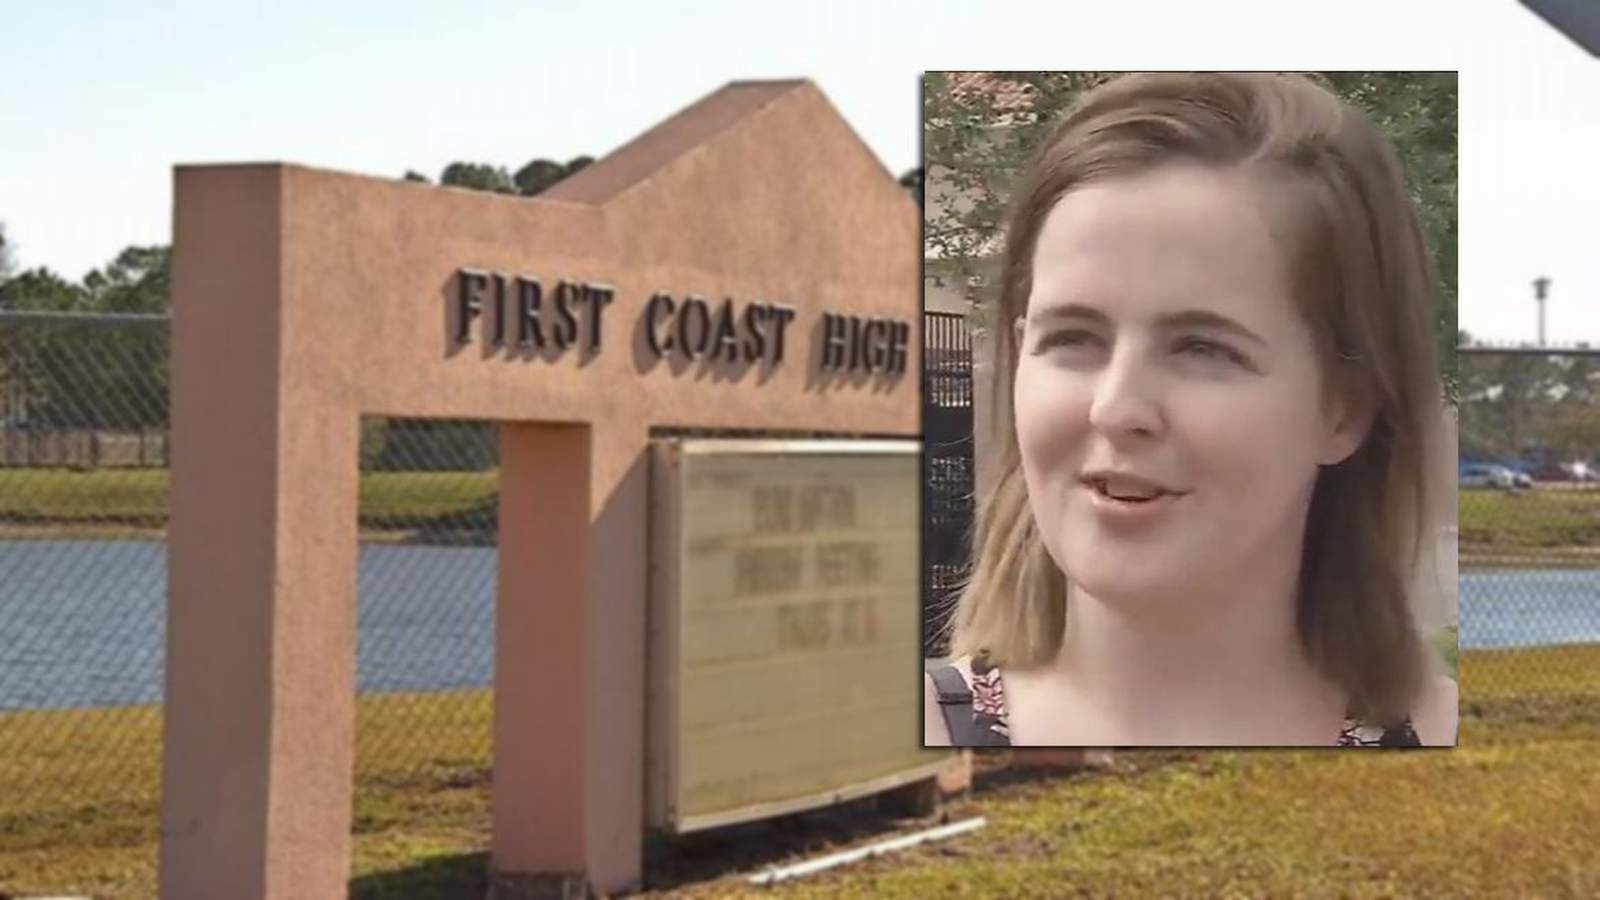 Police: First Coast High teacher sought inappropriate relationship with student